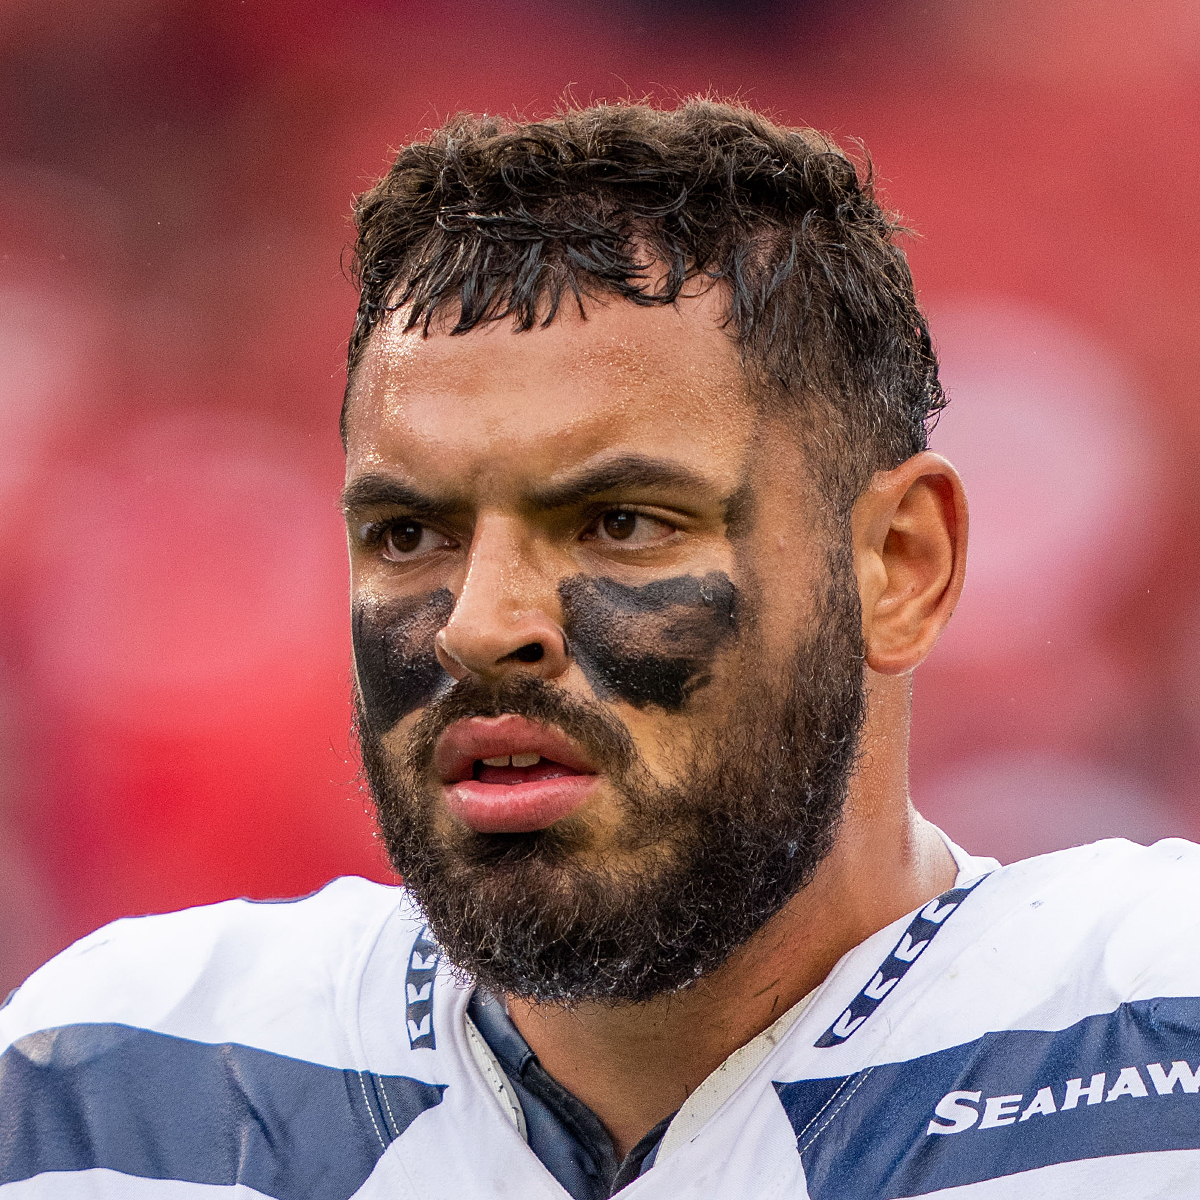 Seahawks expect to be without both starting offensive tackles vs. the Lions